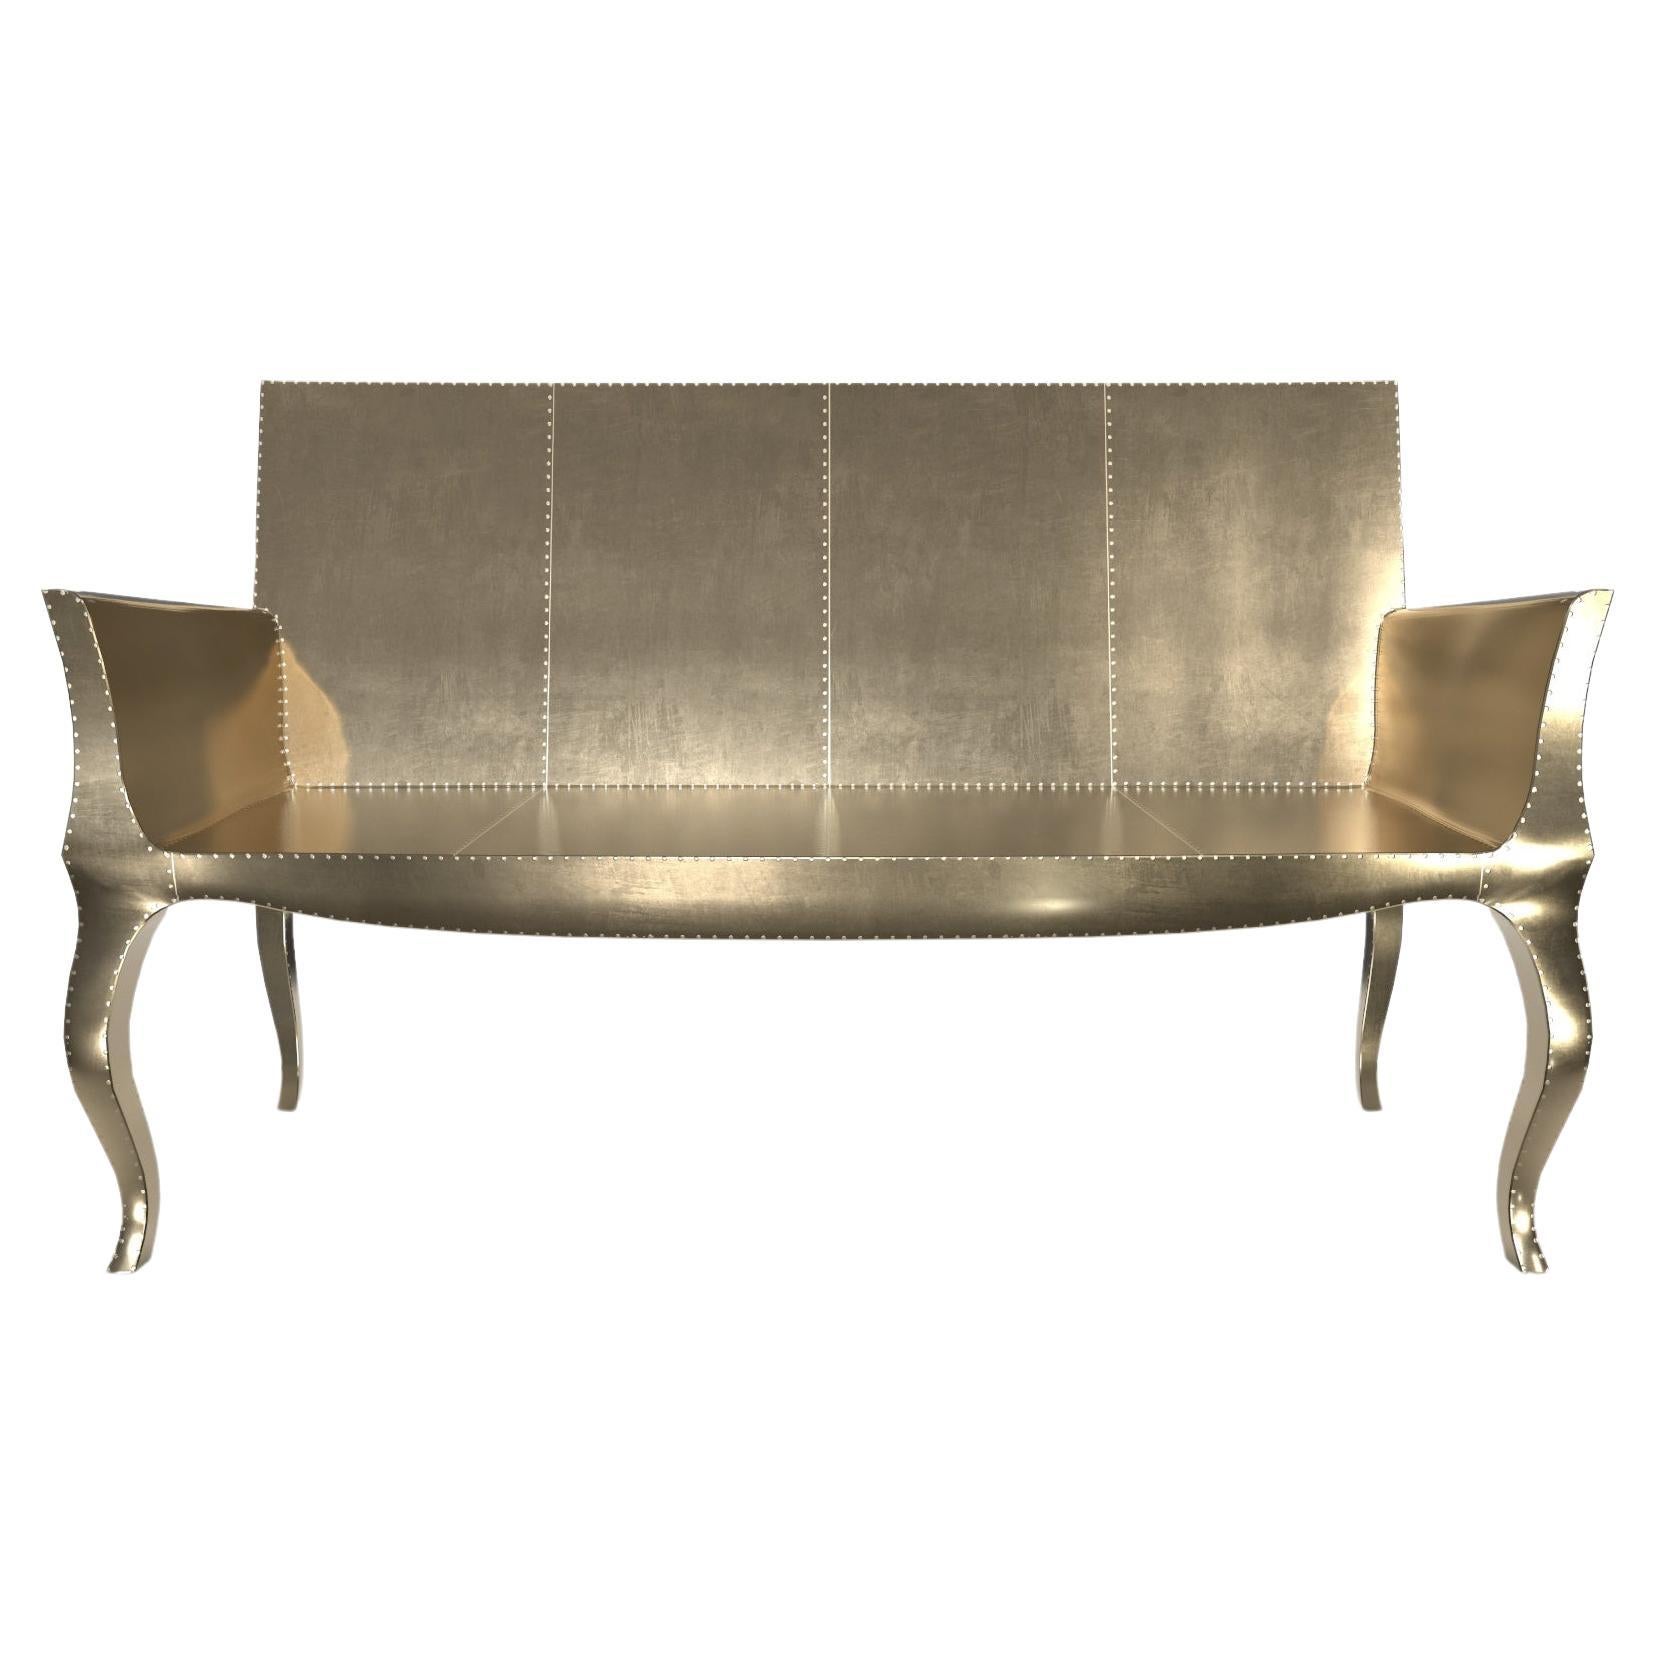 Louise Settee Art Deco Canapes in Smooth Copper by Paul Mathieu for S Odegard For Sale 5